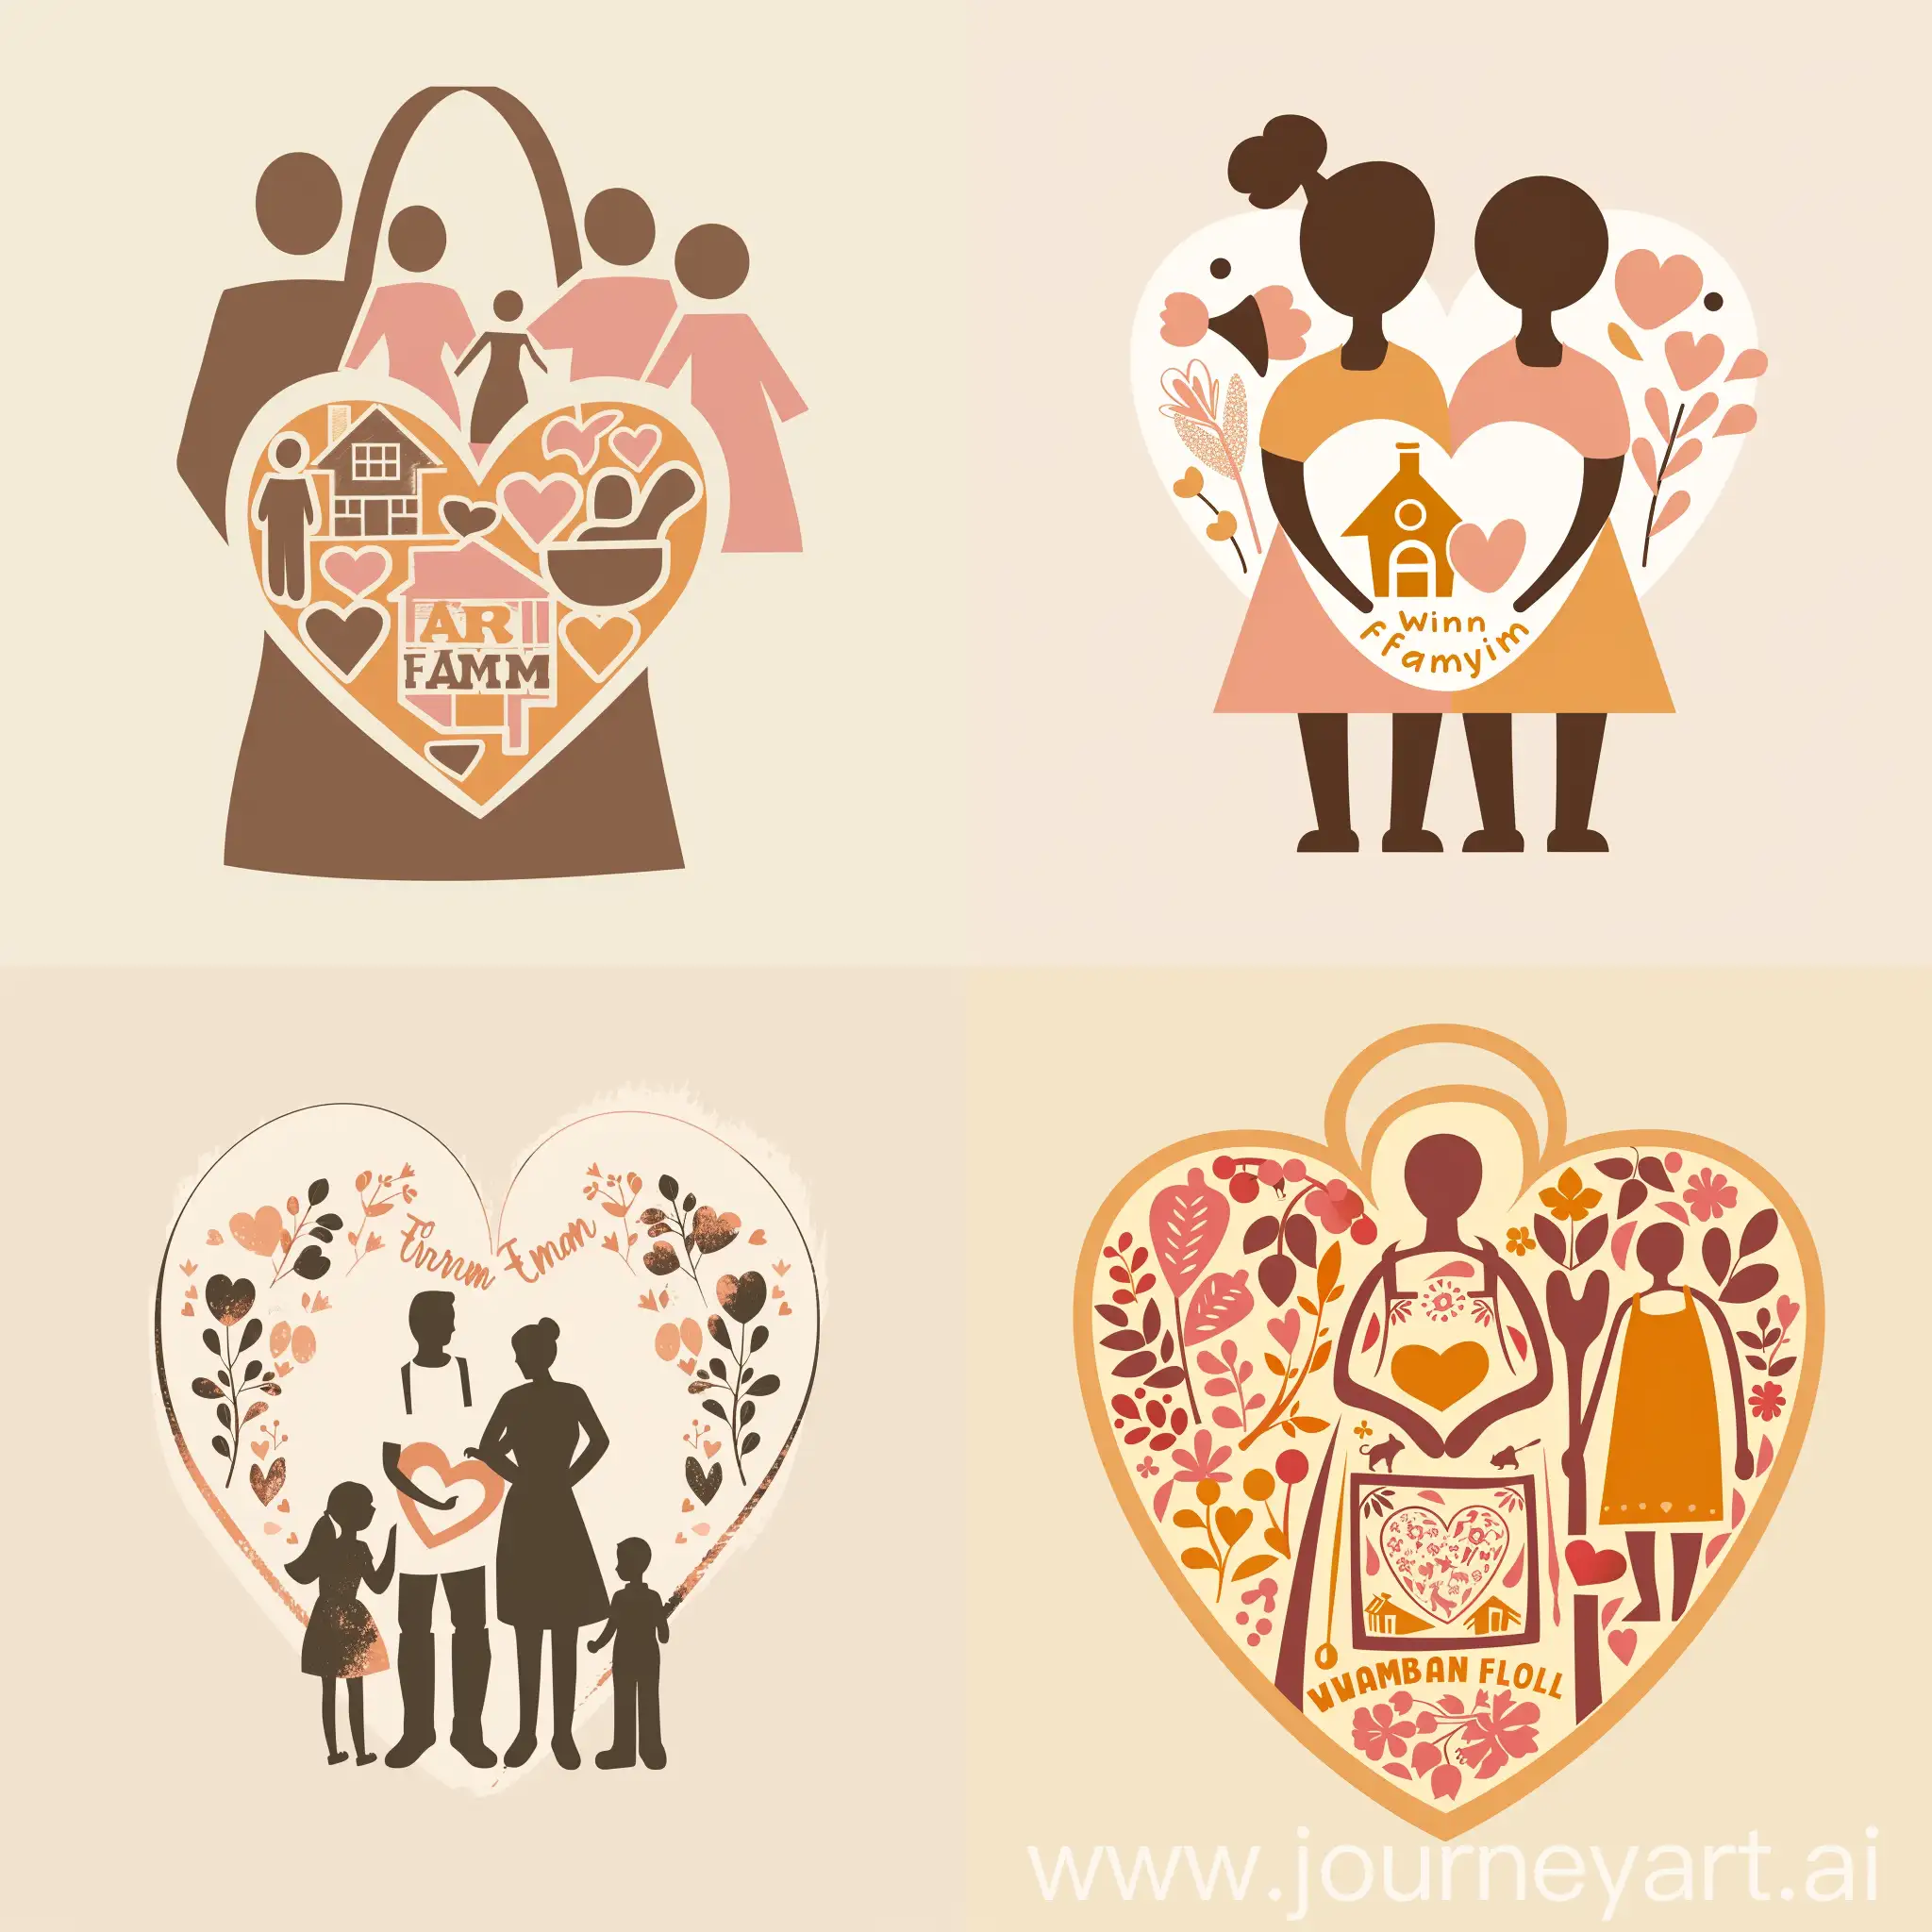 1. Theme: Warm and cozy family atmosphere, focused on high-quality aprons.      2. Colors: Warm tones like light pink, beige, and light yellow, with accents of brown or orange for aprons.      3. Shapes:      - Heart shape to represent love and family unity      - Apron shape, either abstract or detailed, as the focal point      - Silhouette of a house or a family silhouette (multiple figures) in the background or corners      4. Text: "Warm Family" in a curved or rounded font, positioned elegantly next to or overlapping the apron shape. Font color should blend well with the background but still be readable.      5. Style: Simple yet elegant, avoiding too many details that would make it look cluttered. Focus on the core elements that represent the brand.      6. Composition: Center the apron and text, with heart shape or family silhouette either overlapping or in the corners/background for visual balance.      7. Highlights: Add subtle highlights and shadows to create depth and dimension.      8. Resolution: High-definition, crisp edges, and smooth transitions between colors.      Generate a logo for a Taobao store named "Warm Family" that sells high-quality aprons, focusing on the warm family atmosphere and elegant yet simple design.